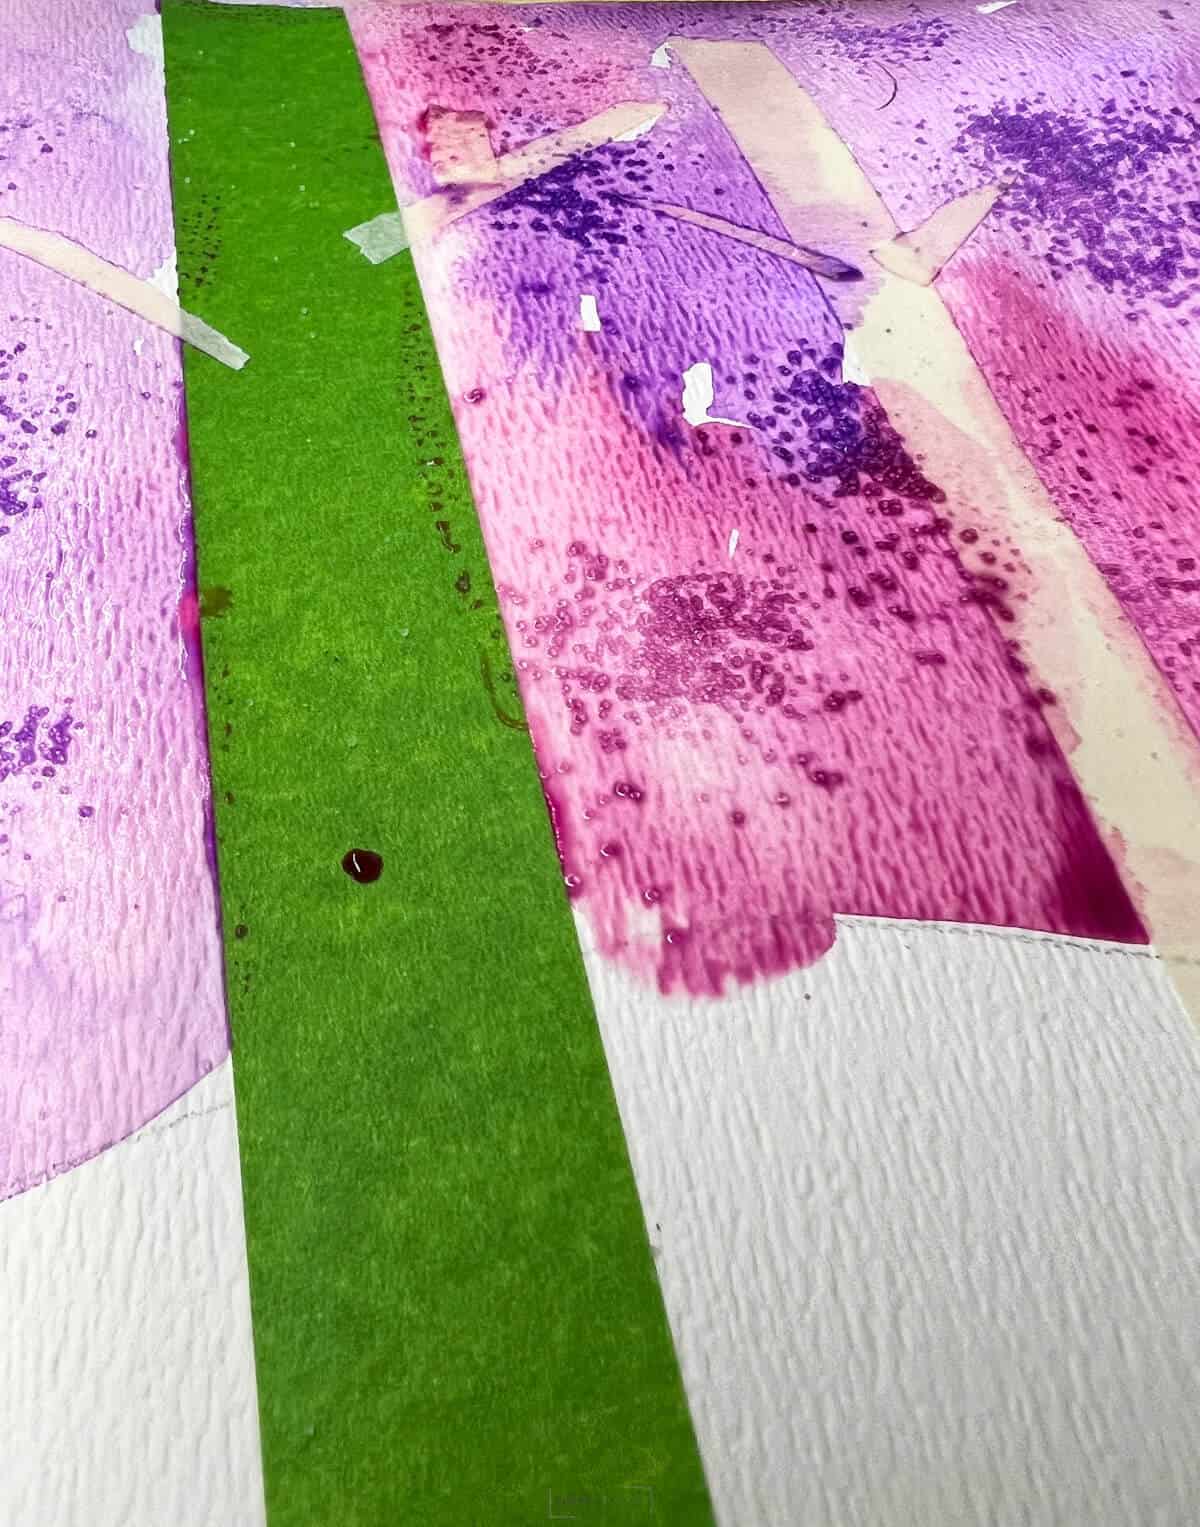 slat sprinkled in watercolor paint with taped trees on art lesson.